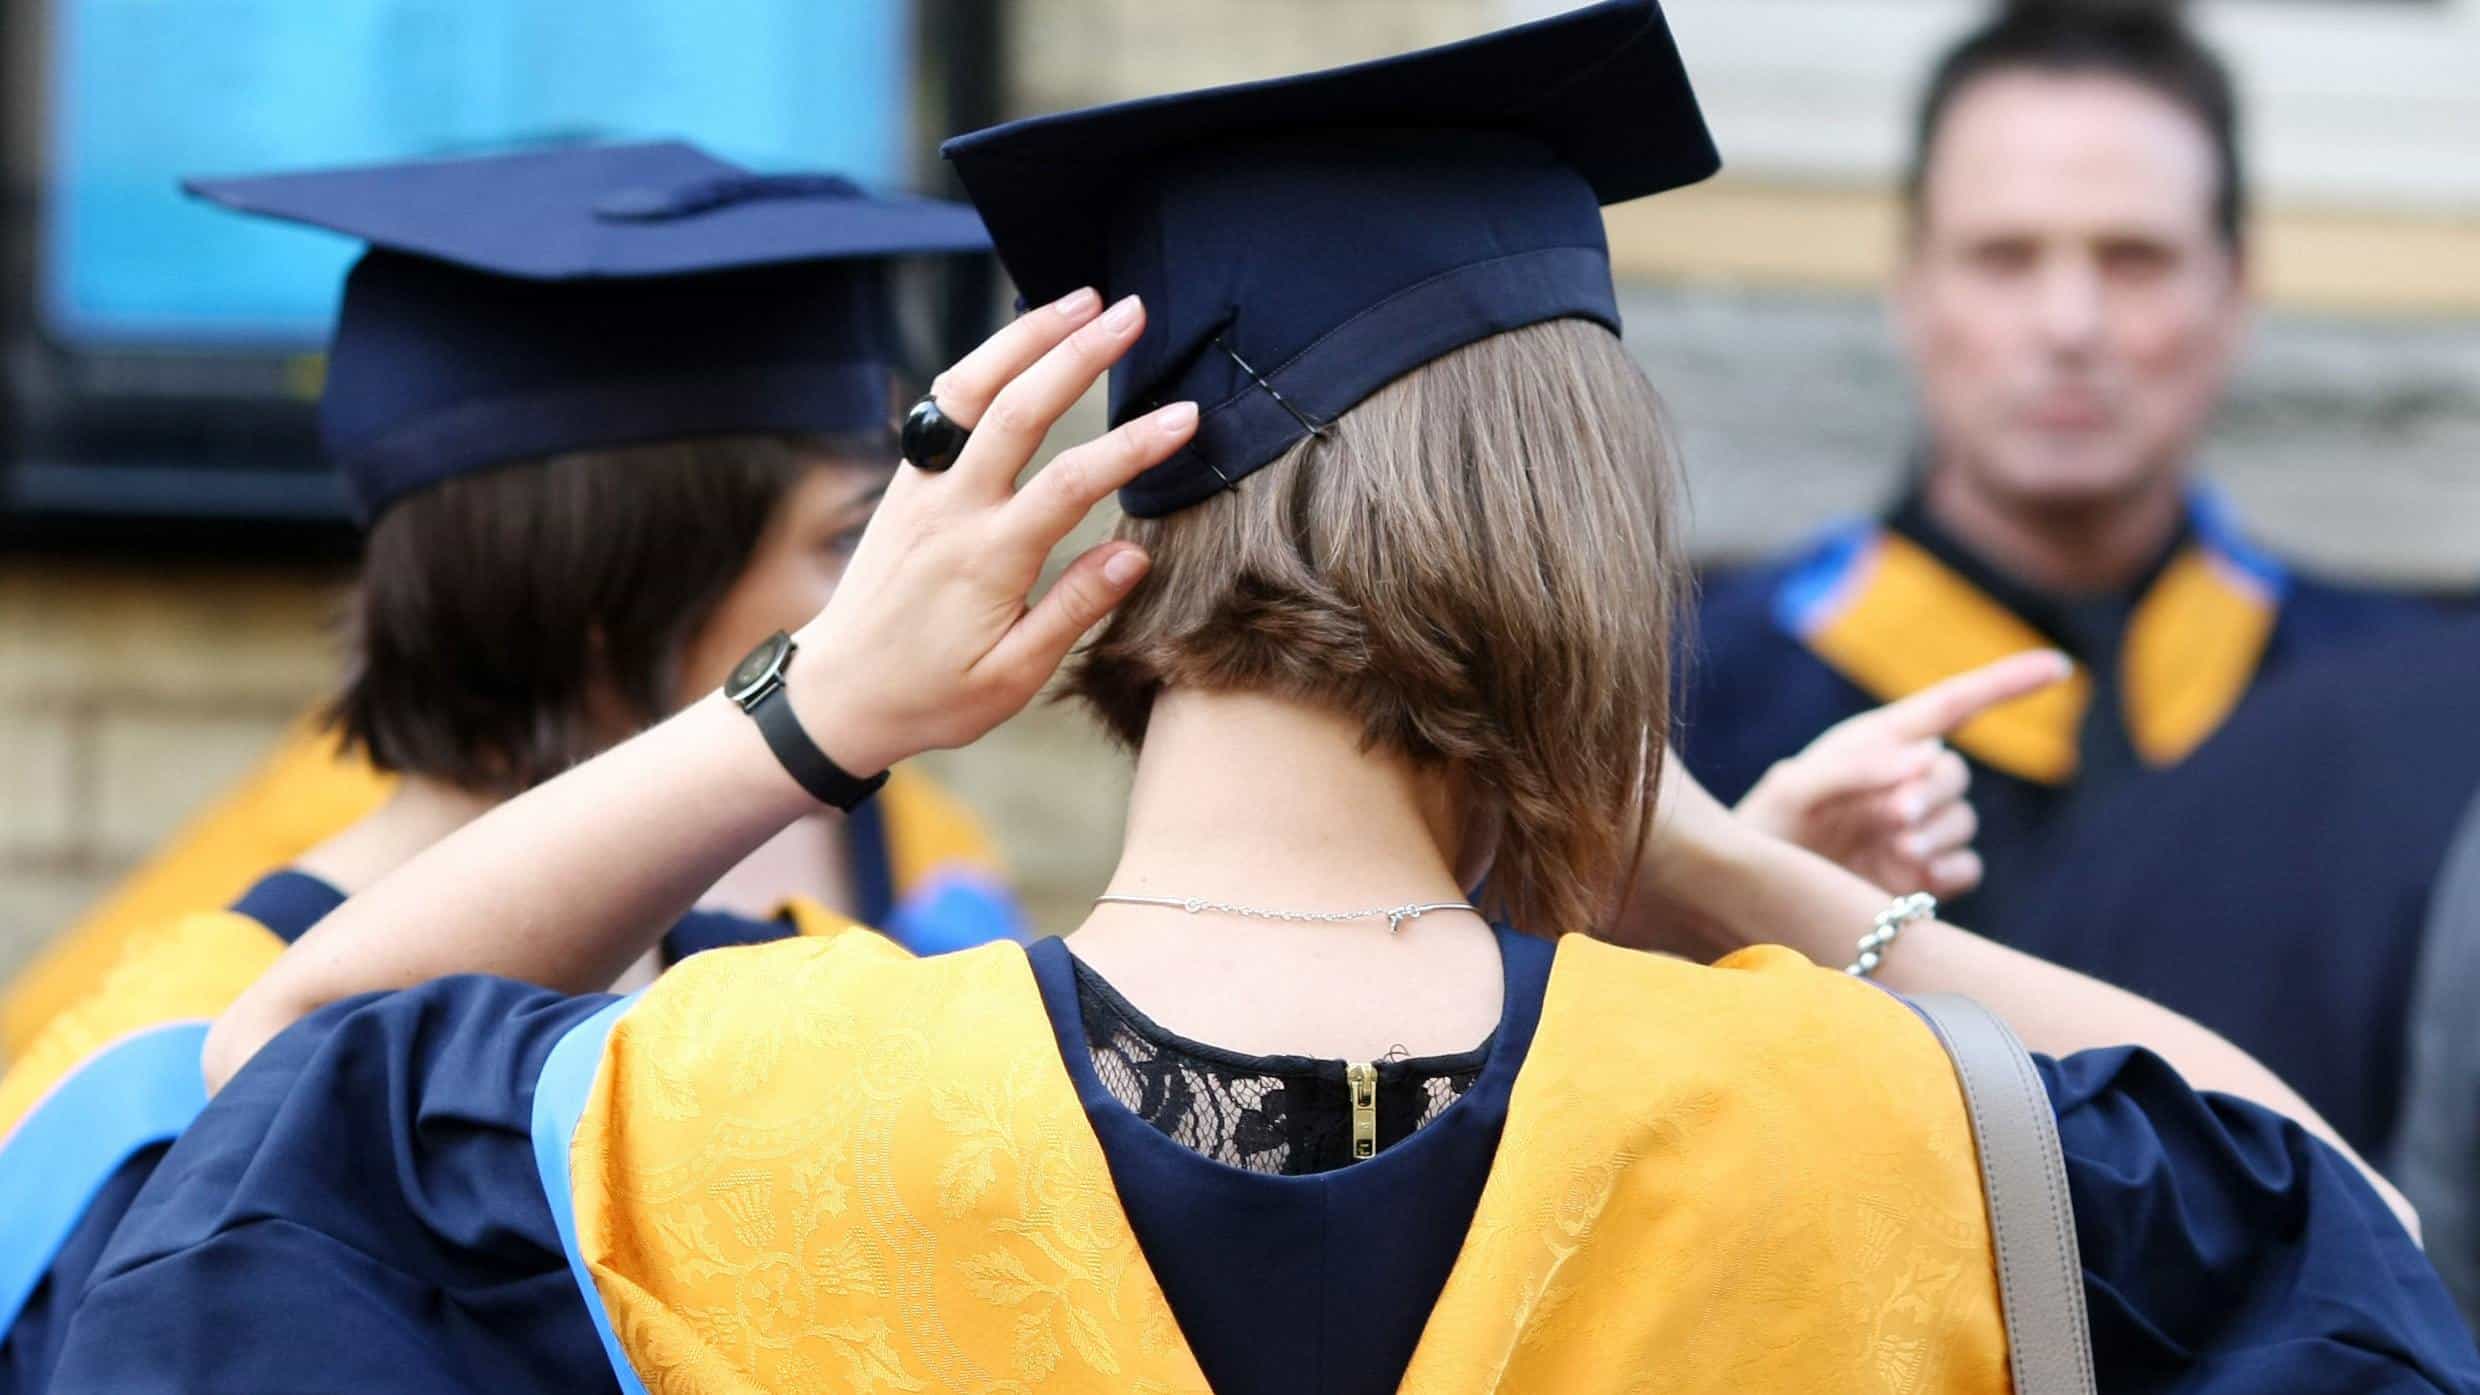 Data reveals biggest gap between rich and poor university students in a decade